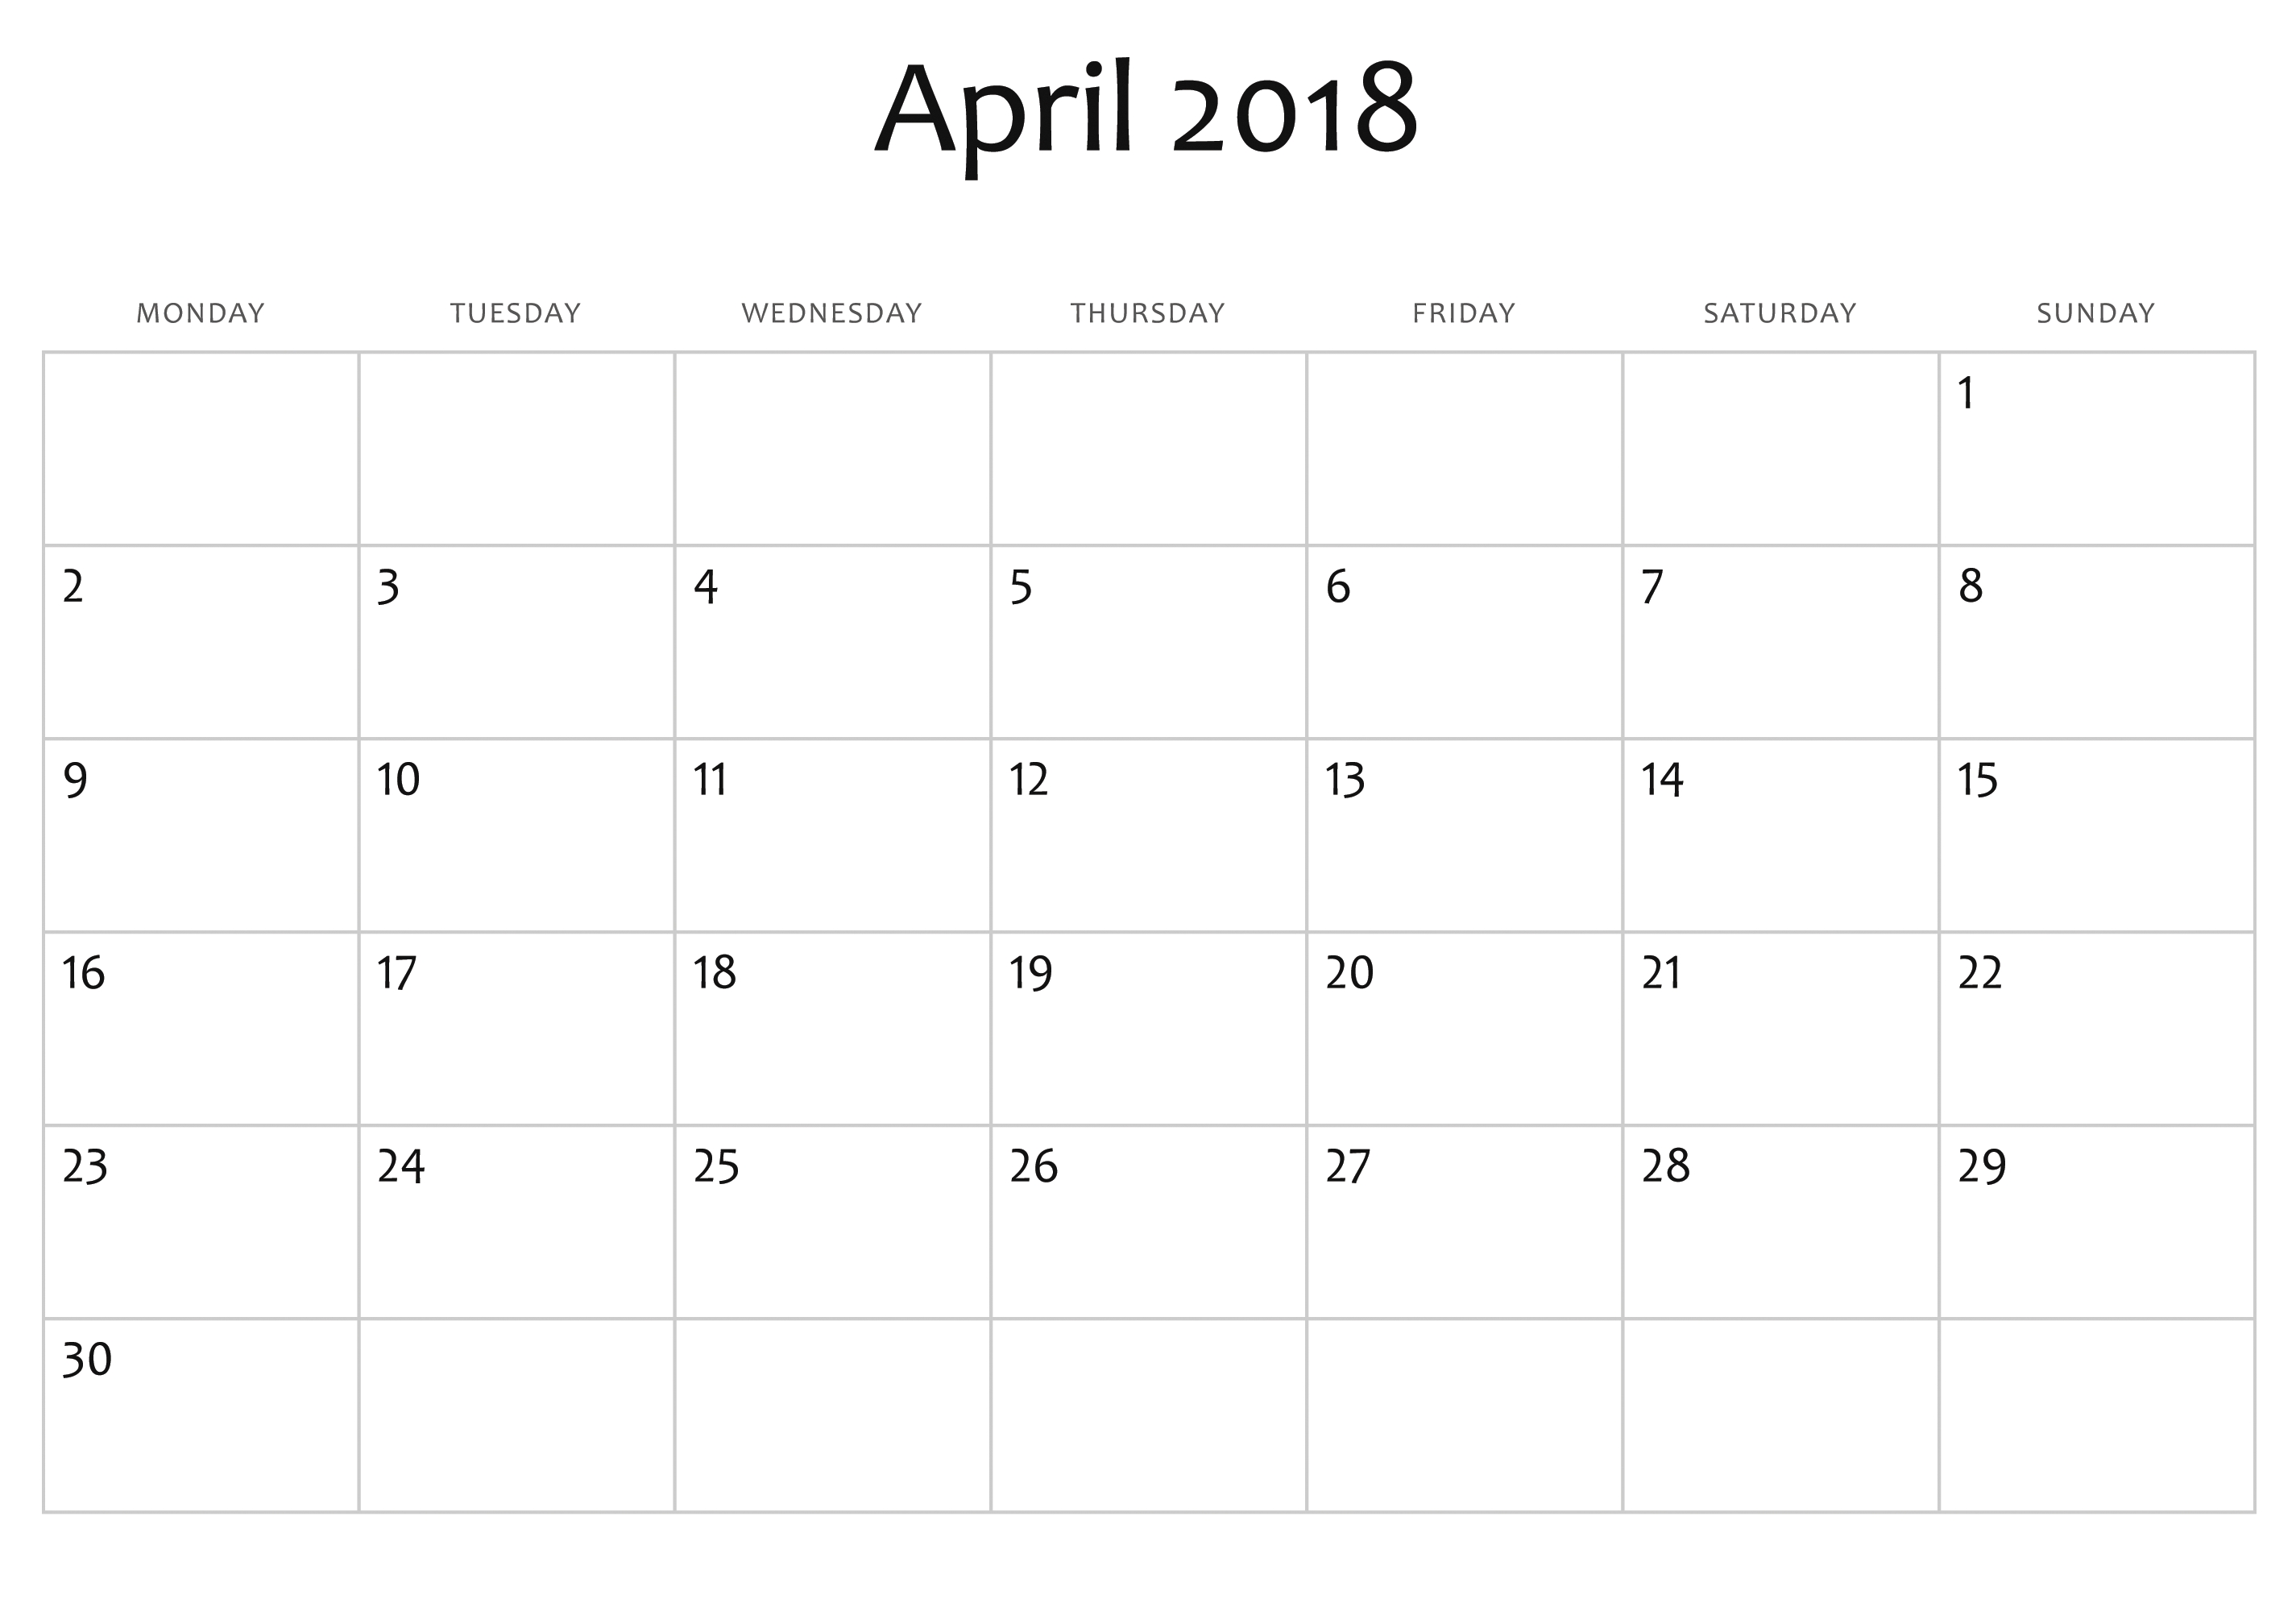 April 2018 Calendar Printable [Free] | Site Provides Dashing Monthly Calendar Template You Can Type In